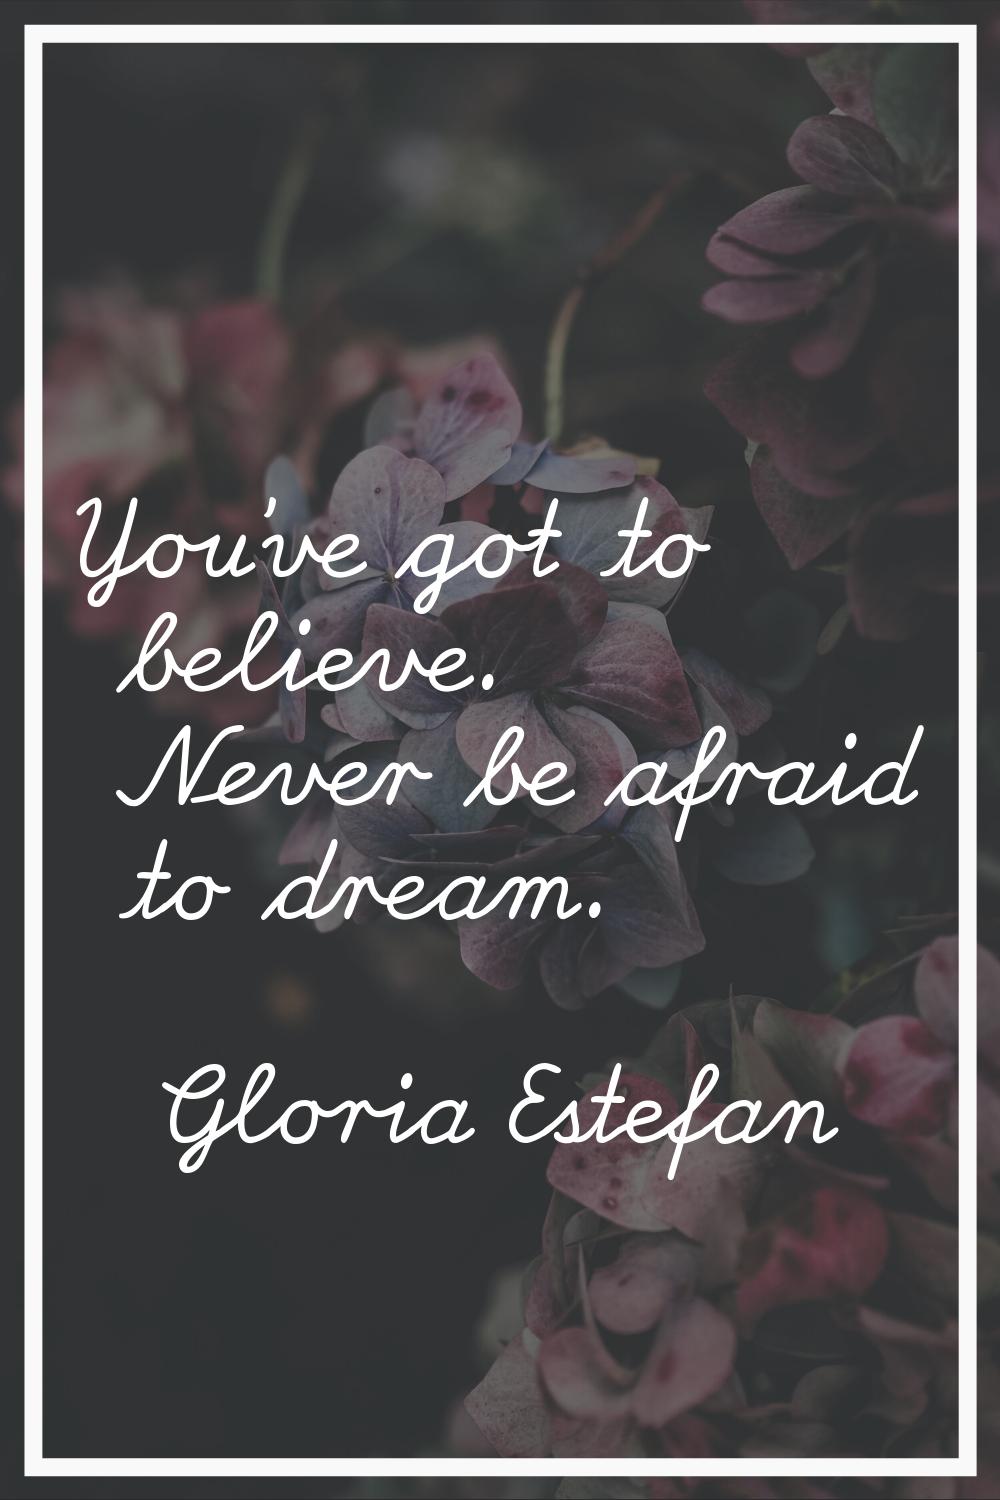 You've got to believe. Never be afraid to dream.